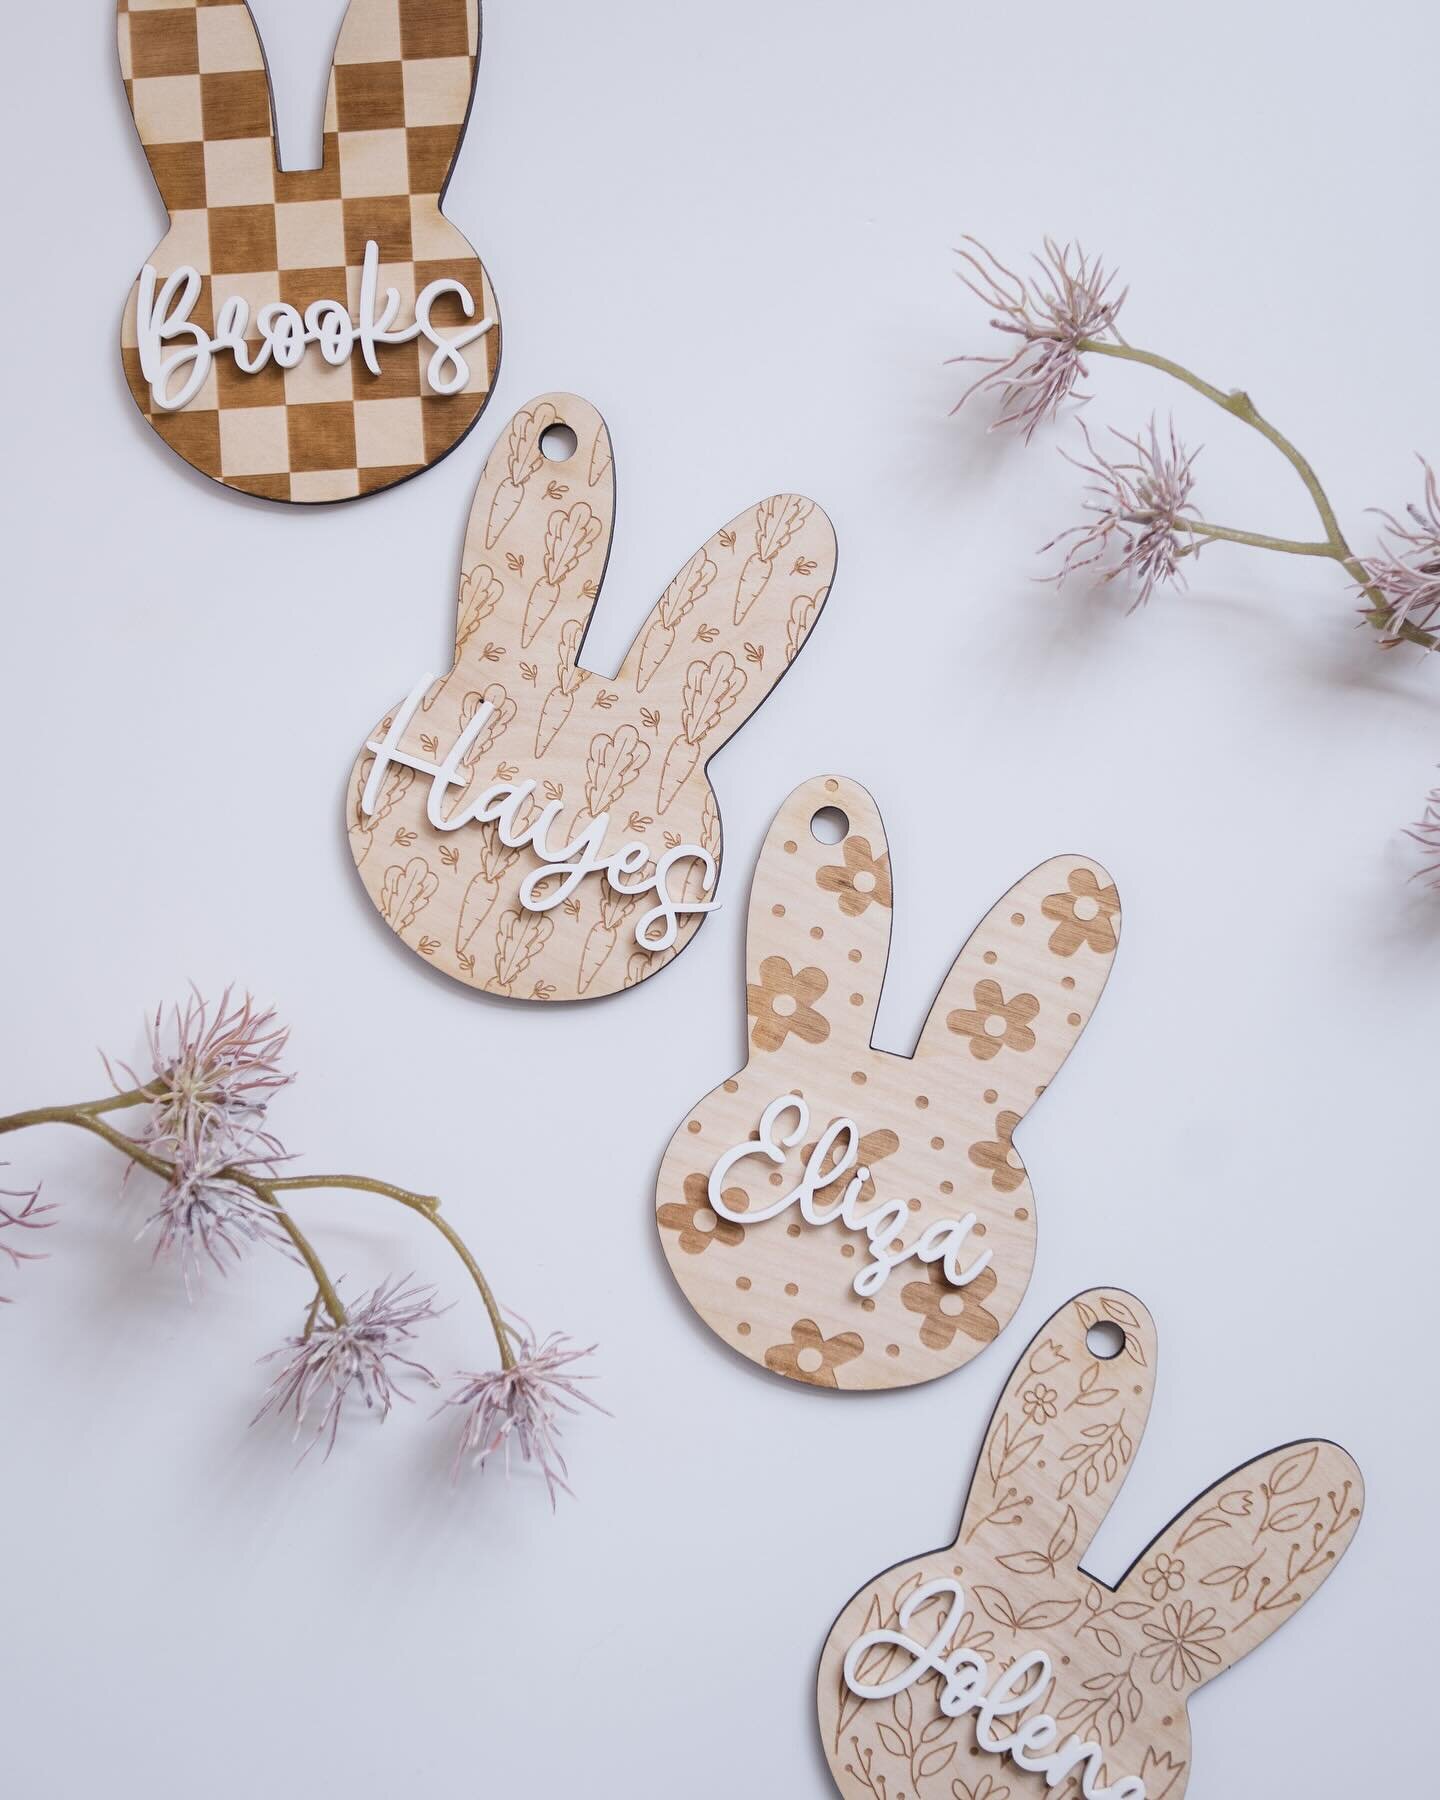 Eggciting news 🐰🐣 brand new Patterned Easter Basket Tags are live in the shop! 

#easter #easterbasket #easterbaskettags #lasercutting #laserengraving

Product photos by @stewartimagery